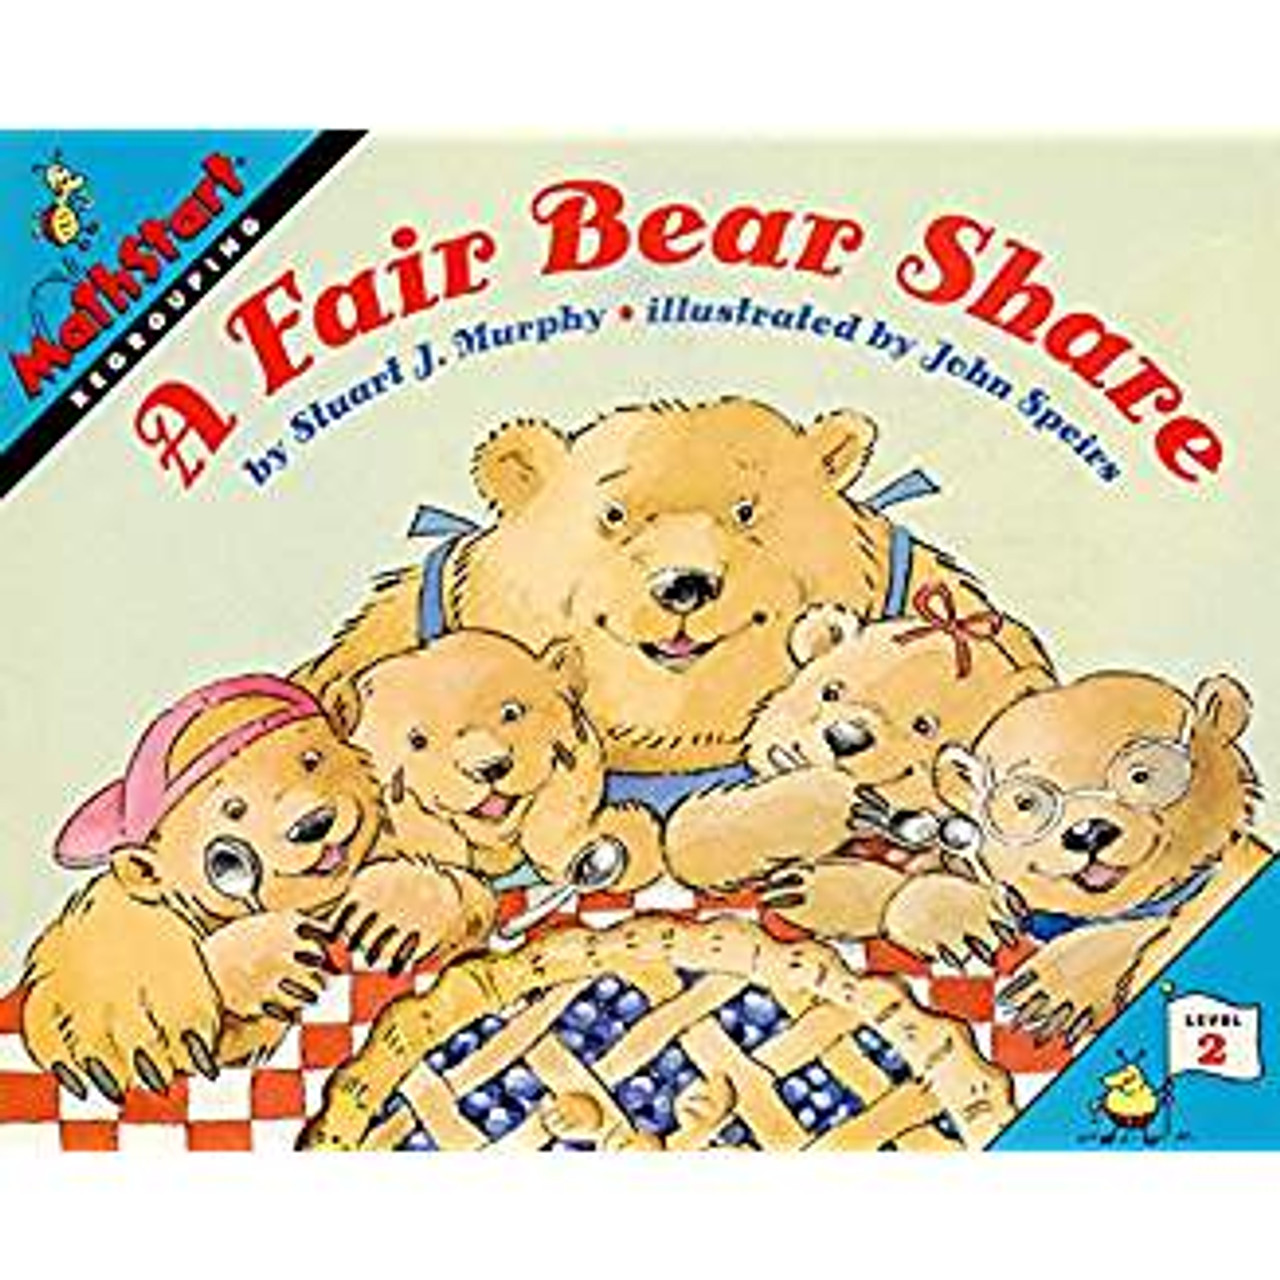 Blue Ribbon Blueberry Pie is the best--but do the bear cubs have enough ingredients to bake one? Regrouping their berries, nuts, and seeds by tens and ones reveals the answer in this enjoyable book. Full color.